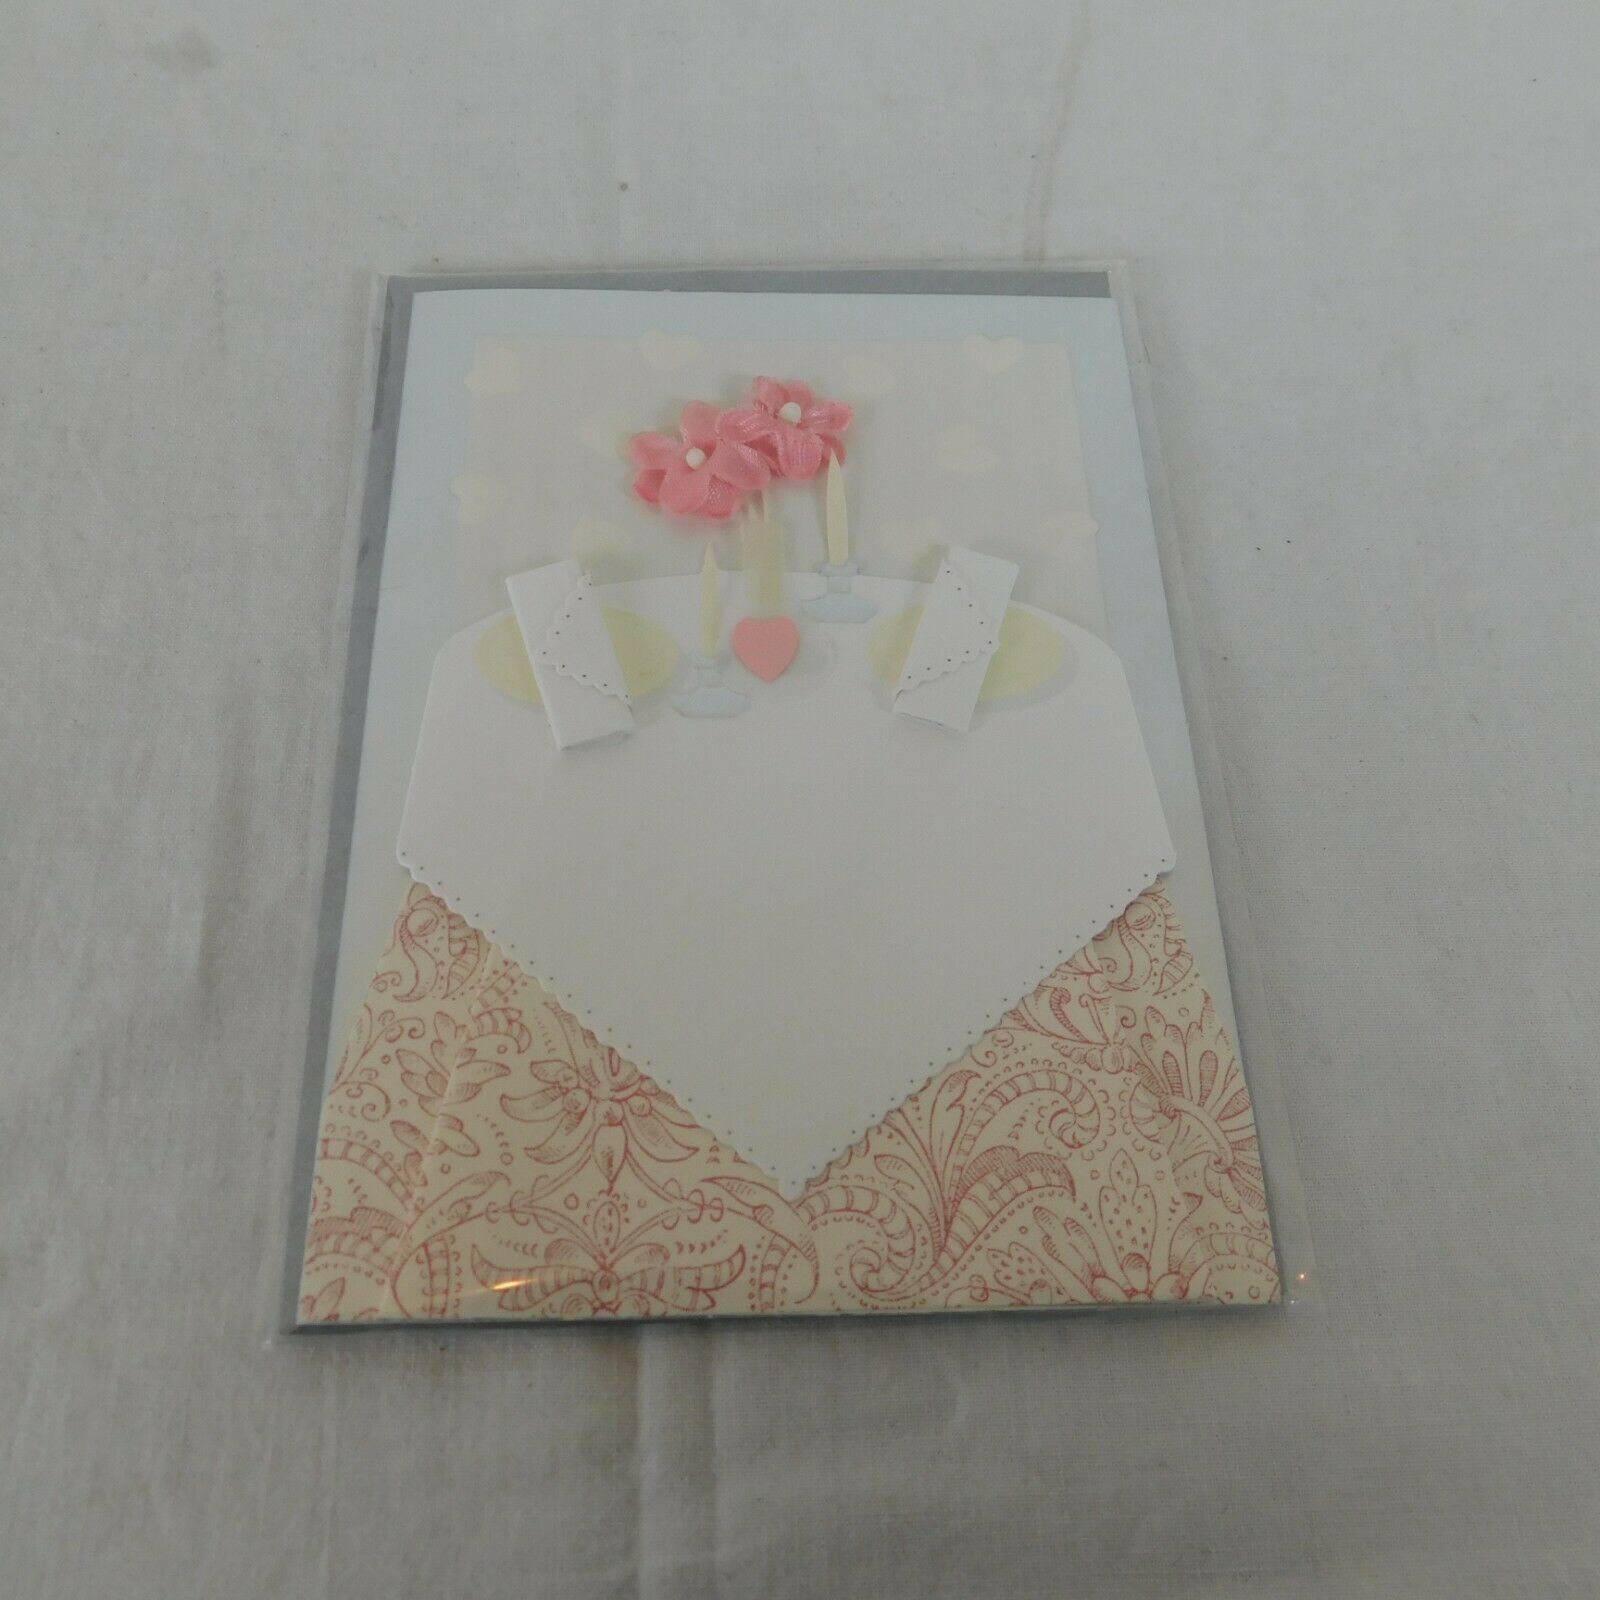 Paper Magic Group Blank Greeting Note Card Dinner for Two Pink Flowers Envelope - $4.00